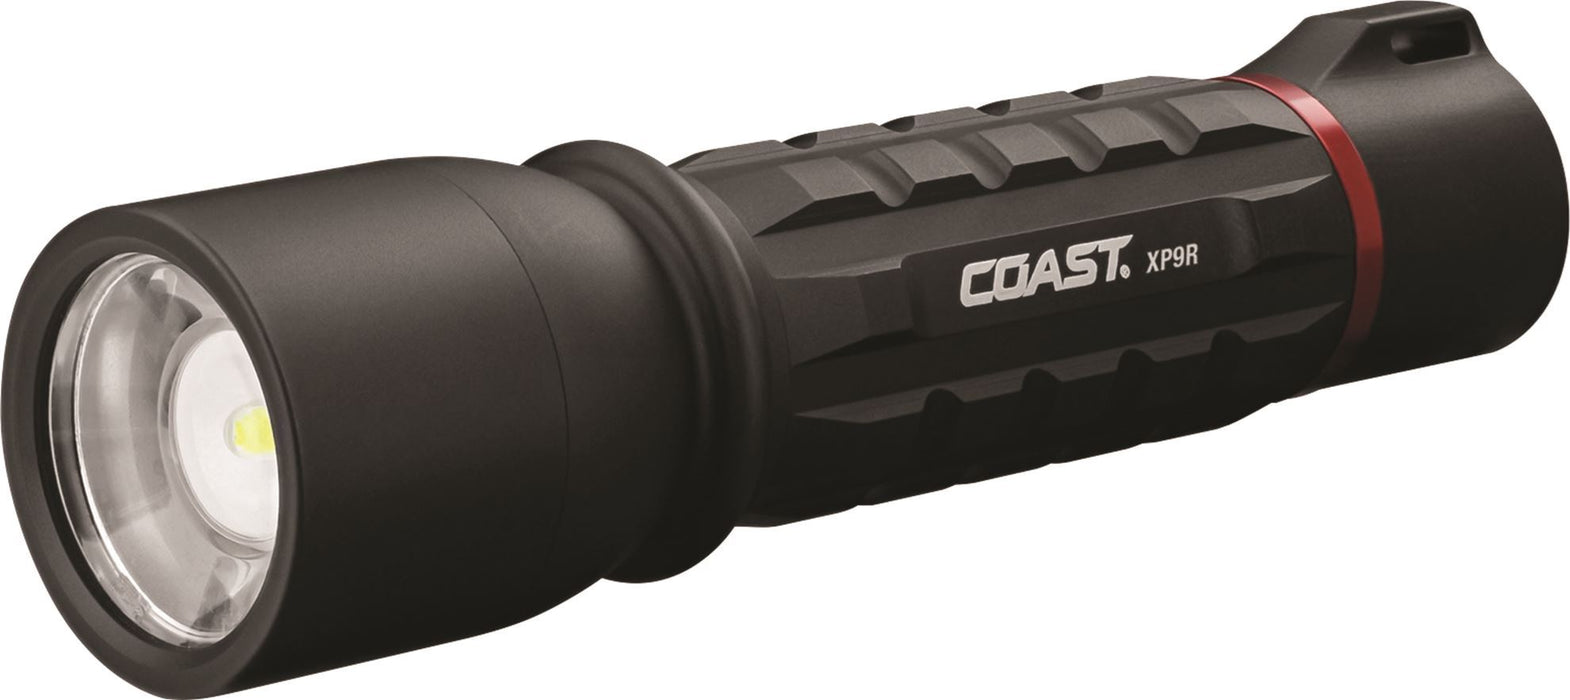 COAST LED Dual-Power Rechargeable Torch with Slide Focus. 1000 Lumens IP54 Water